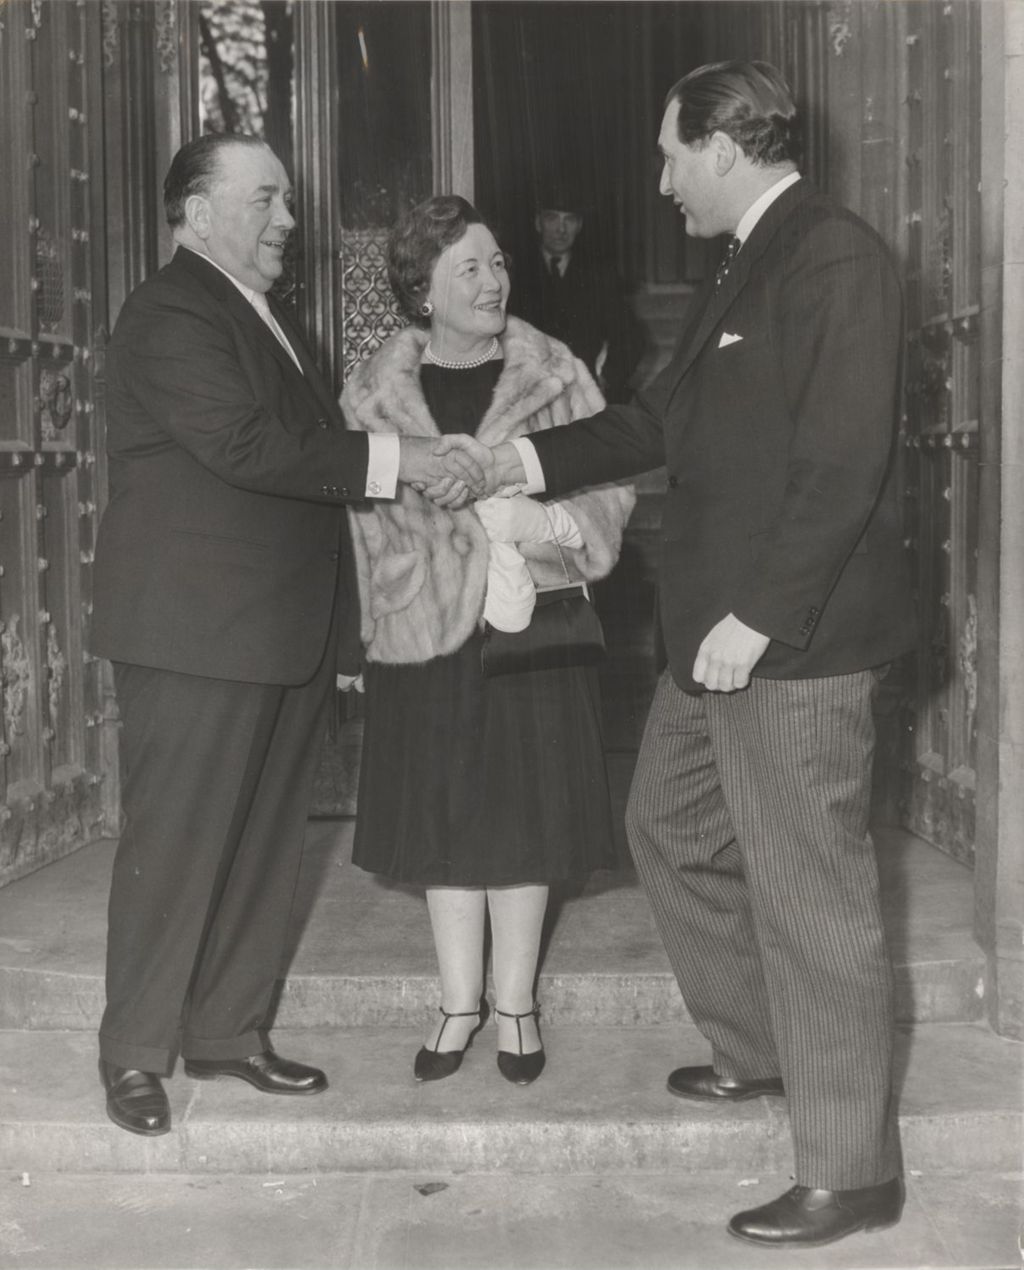 Richard J. and Eleanor Daley greet a member of Parliament at the House of Commons in London